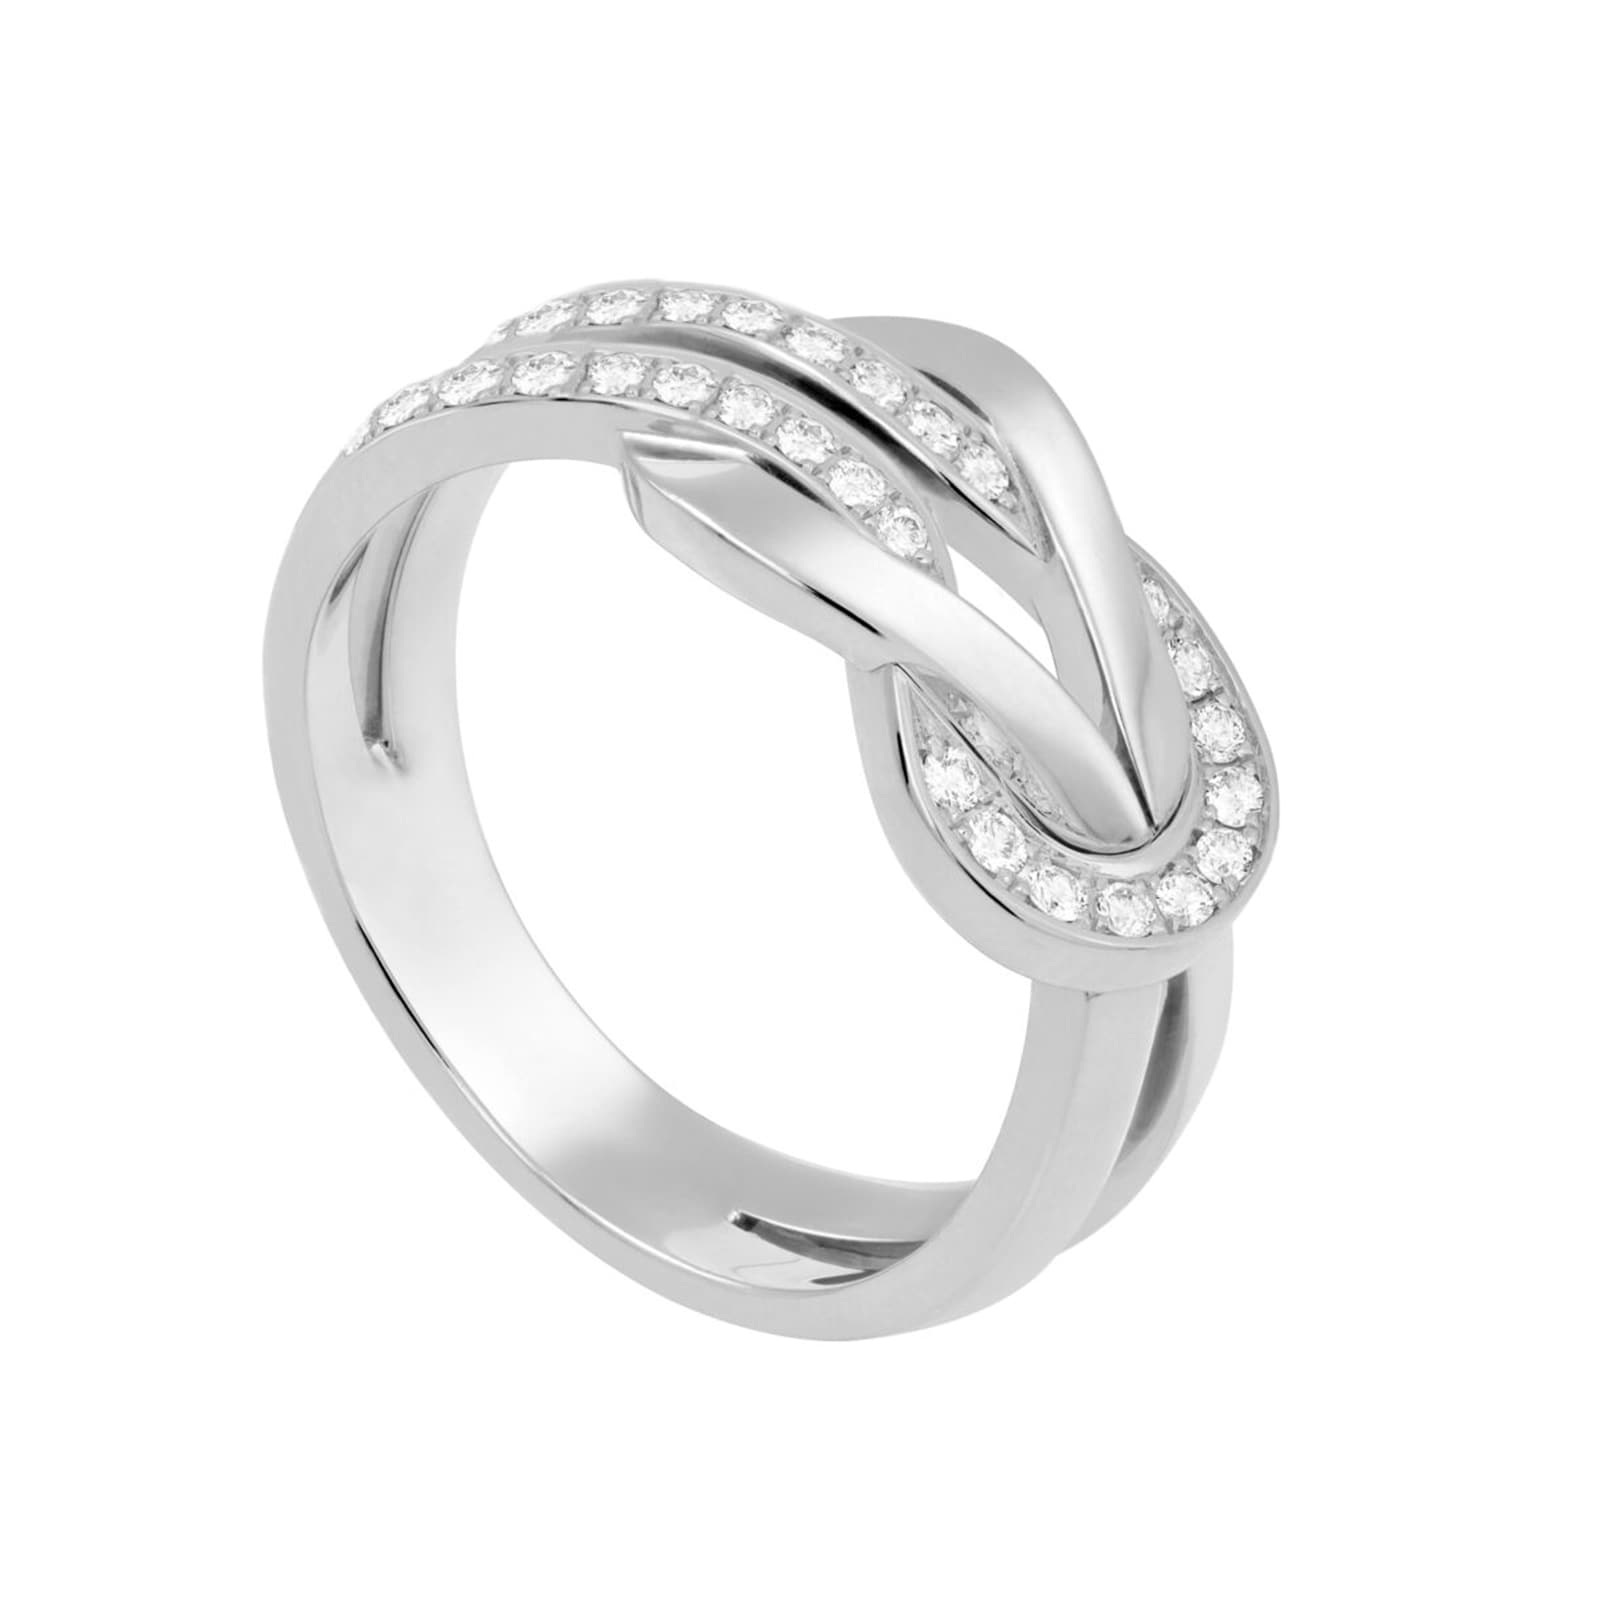 Chance Infinie 18ct White Gold 0.22ct Diamond Ring - Ring Size L